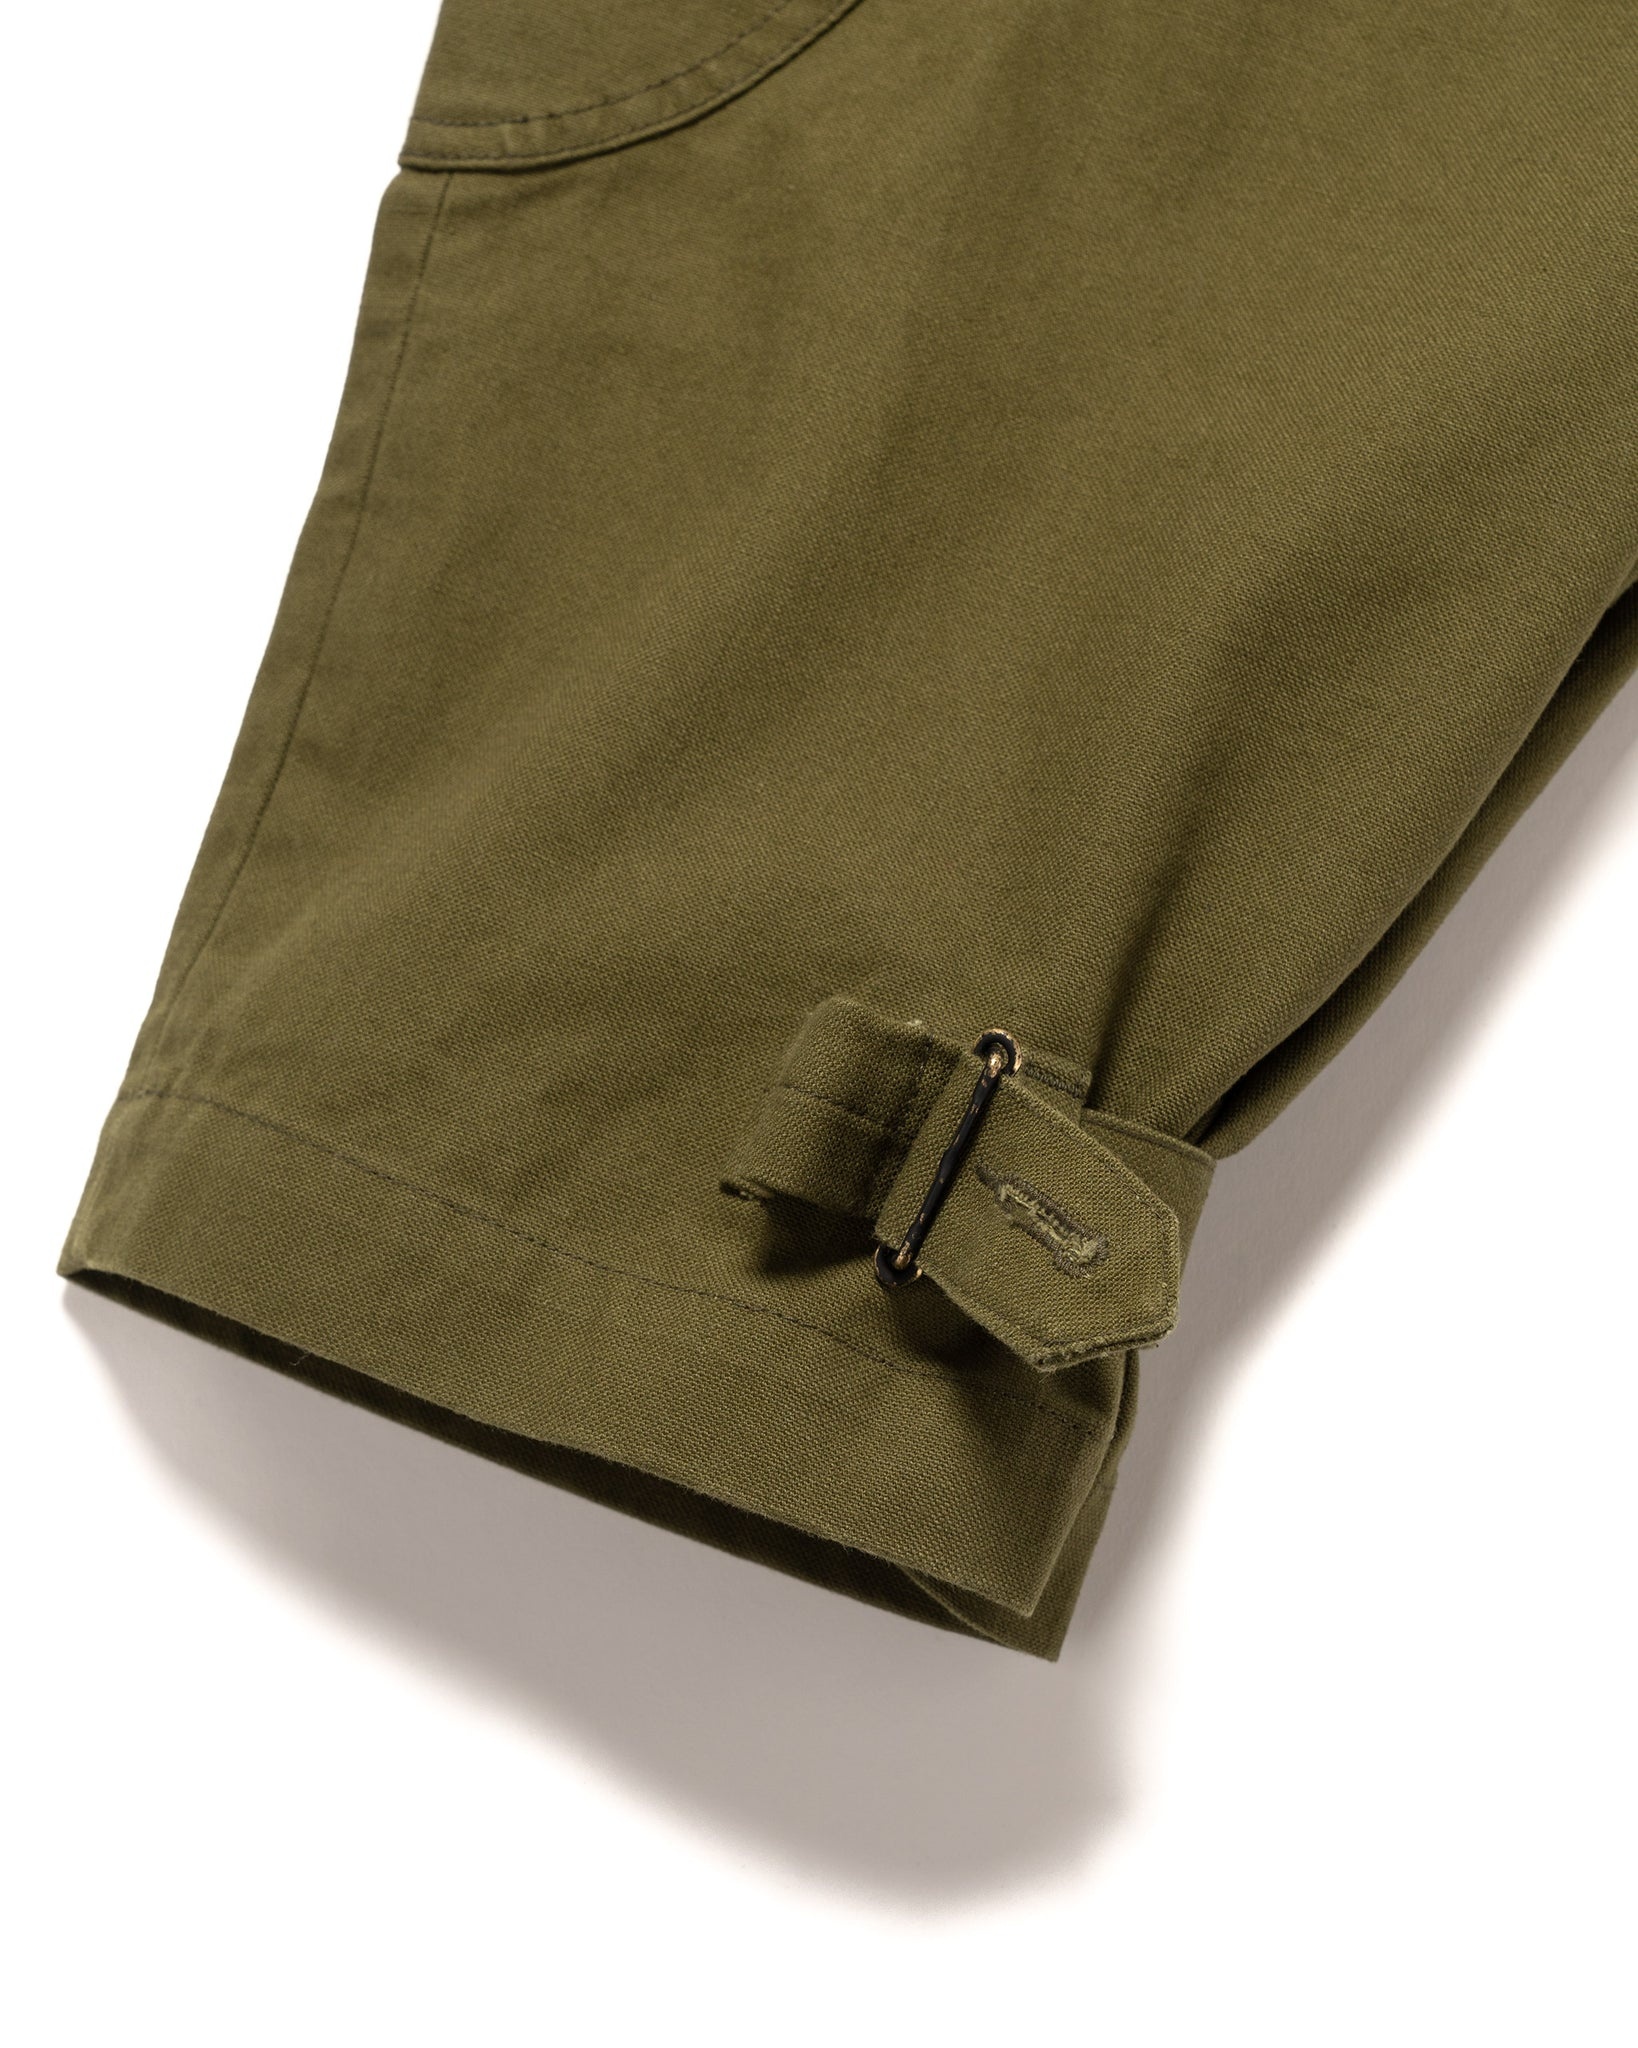 MILITARY MOTORCYCLE PANTS OLIVE DRAB - 7